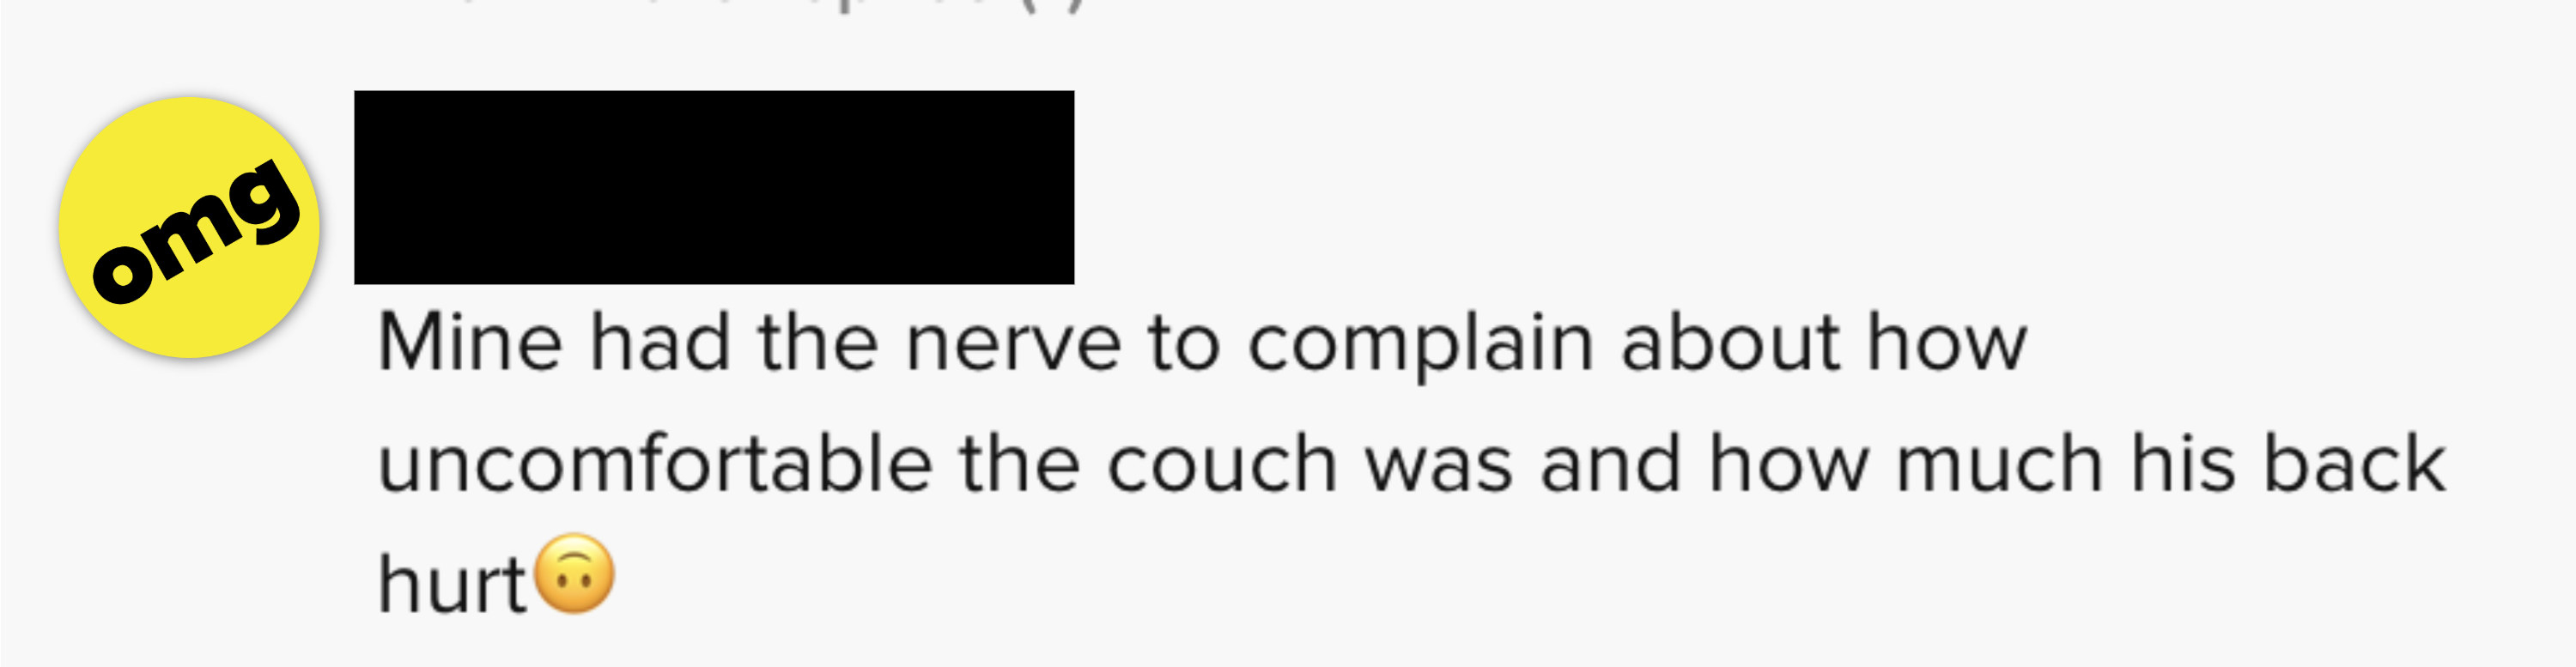 &quot;Mine had the nerve to complain about how uncomfortable the couch was and how much his back hurt&quot;